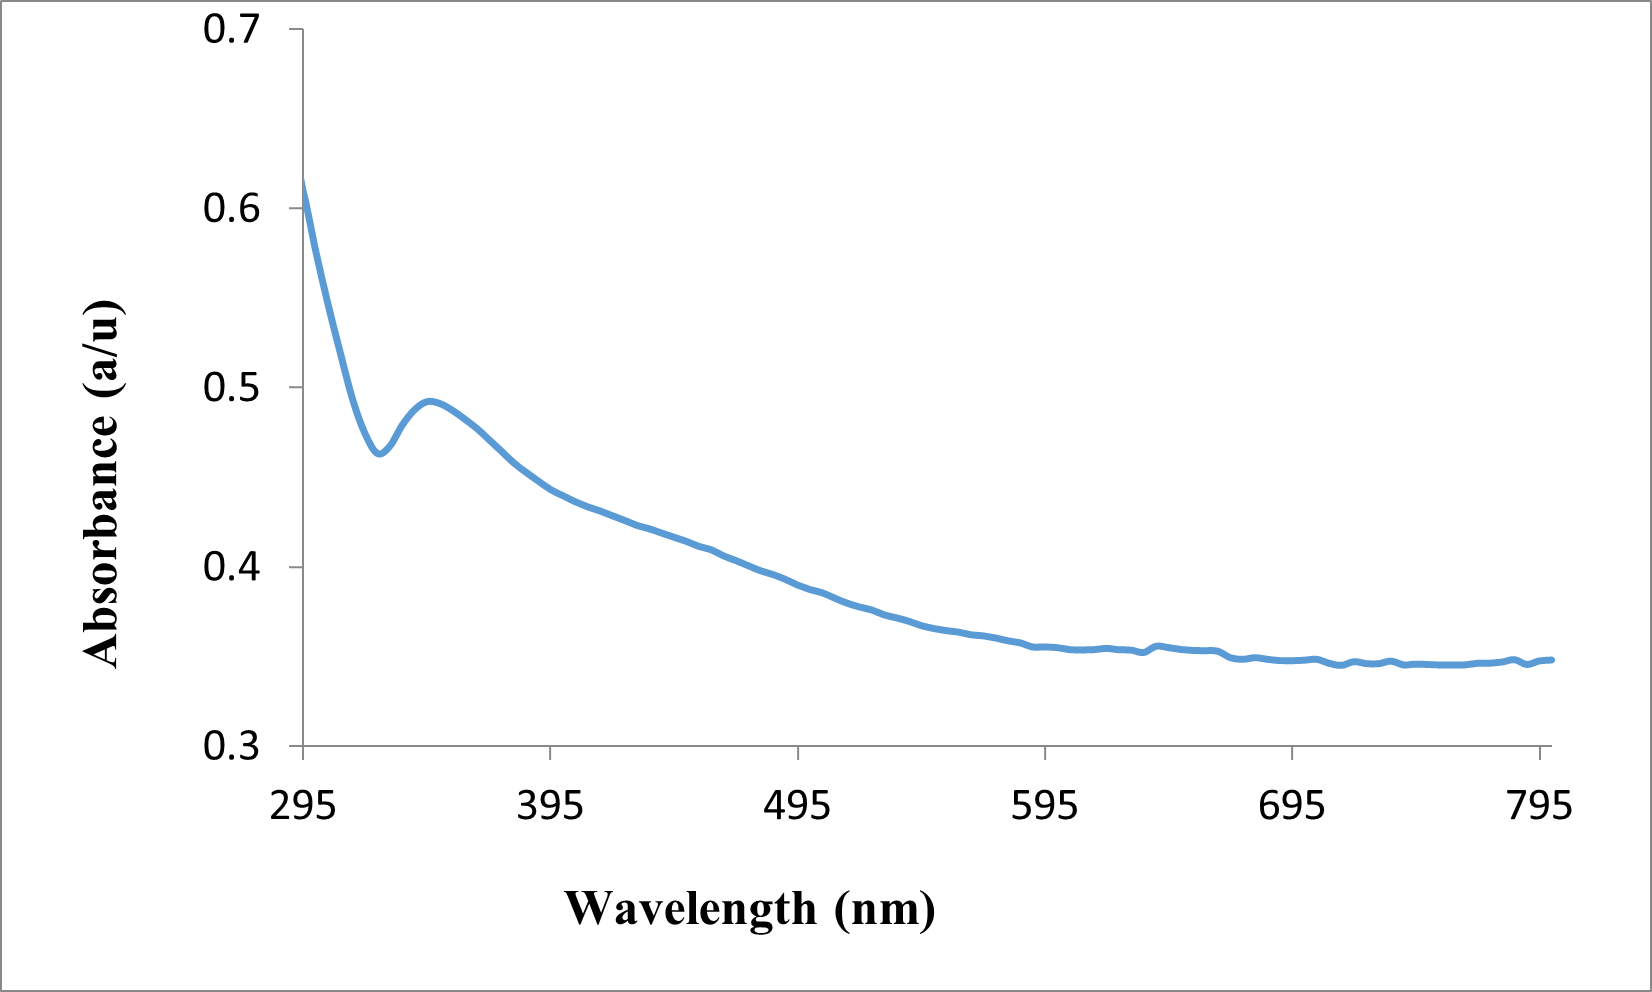 UV Visible spectrum of silver nanoparticle with absorption maximum at 350 nm